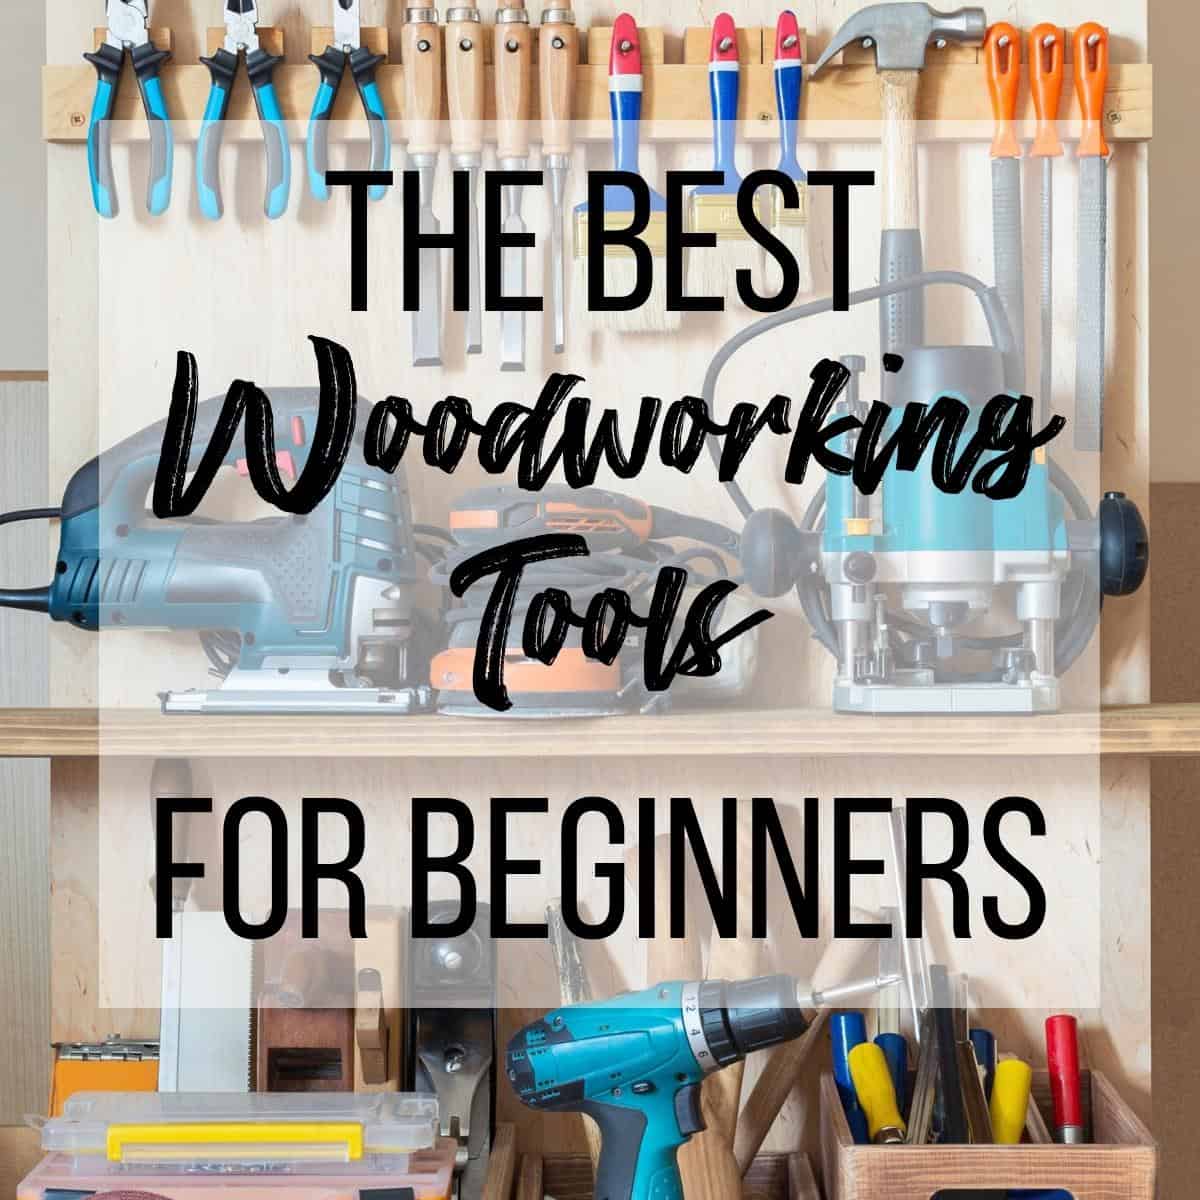 12 Essential Woodworking Hand Tools